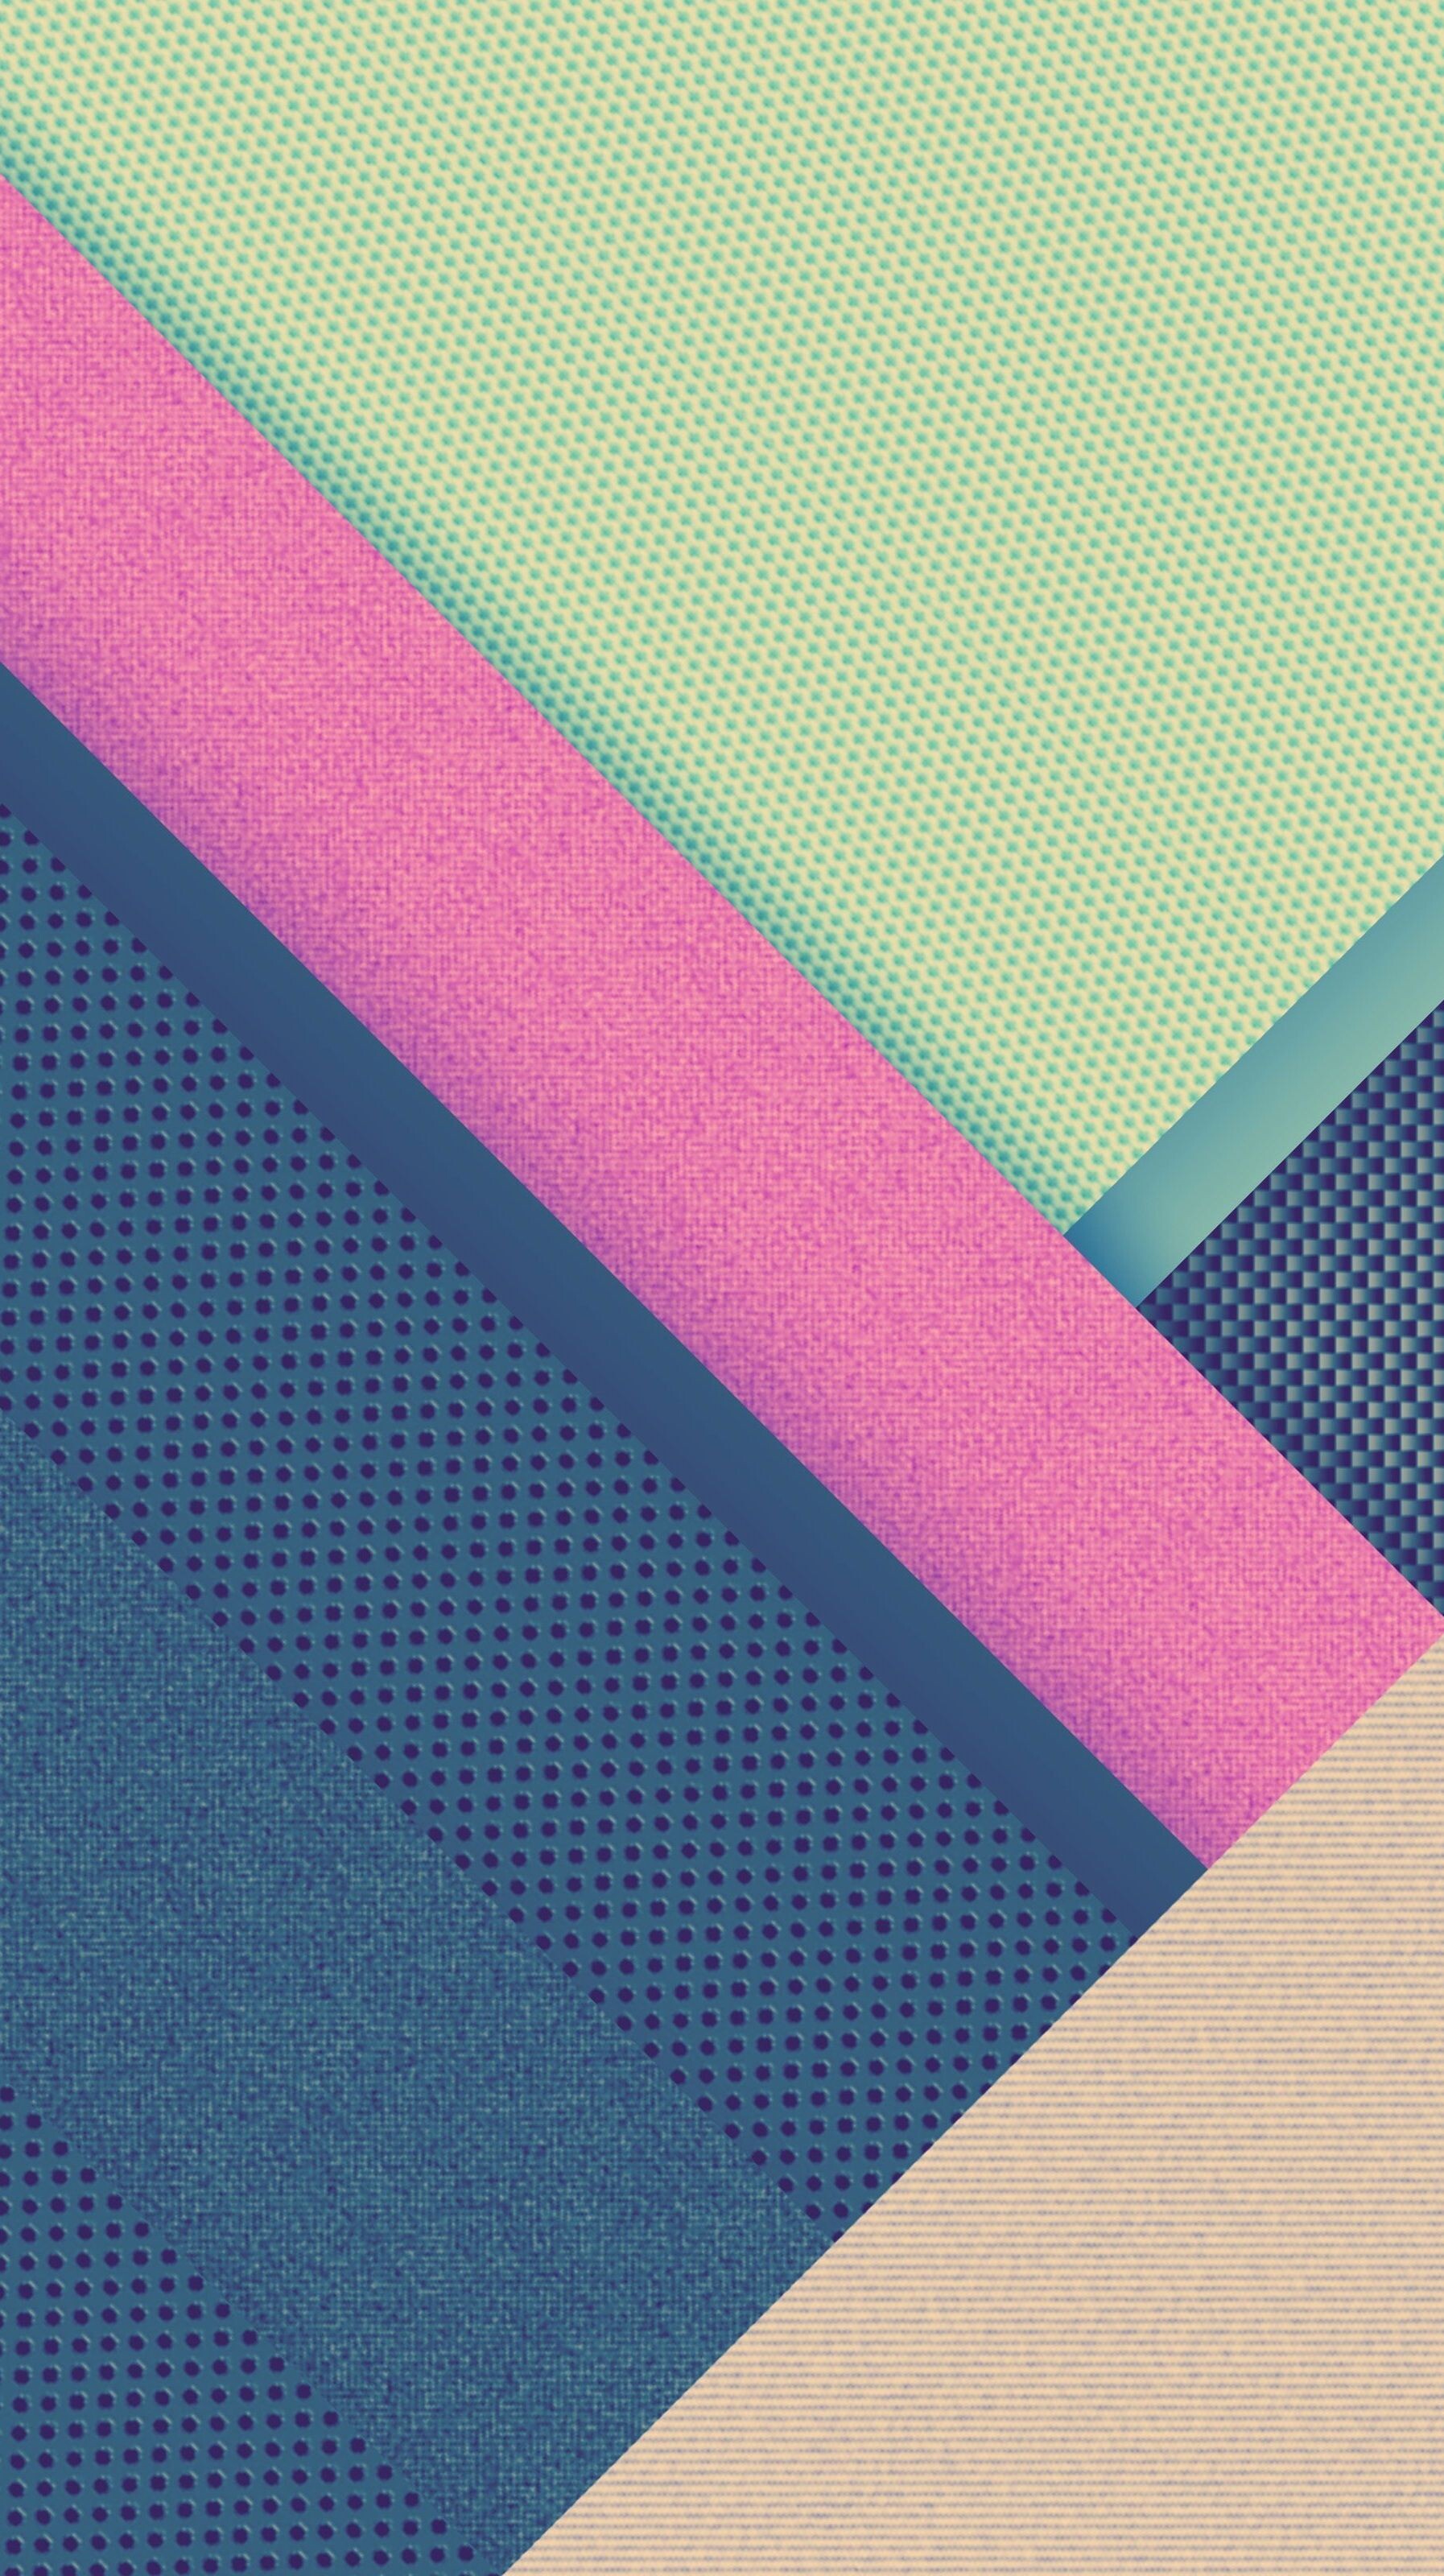 Geometric Abstract: Pastel, Parallels, Three-dimensional space. 1800x3200 HD Background.